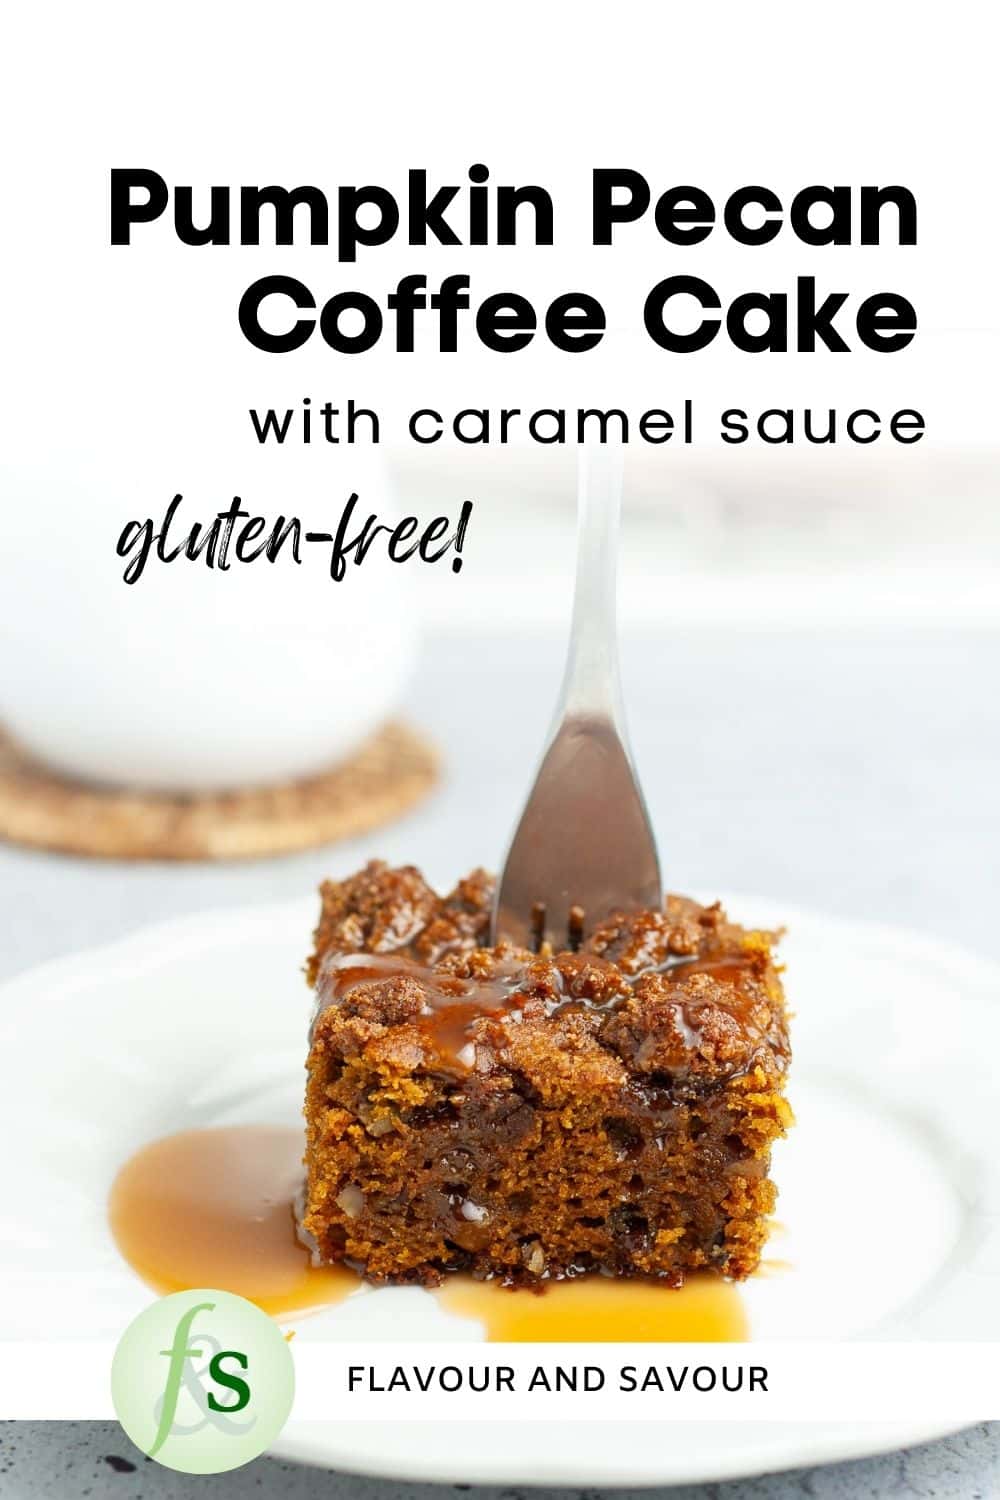 Image with text overlay for gluten-free pumpkin pecan coffee cake with caramel sauce.